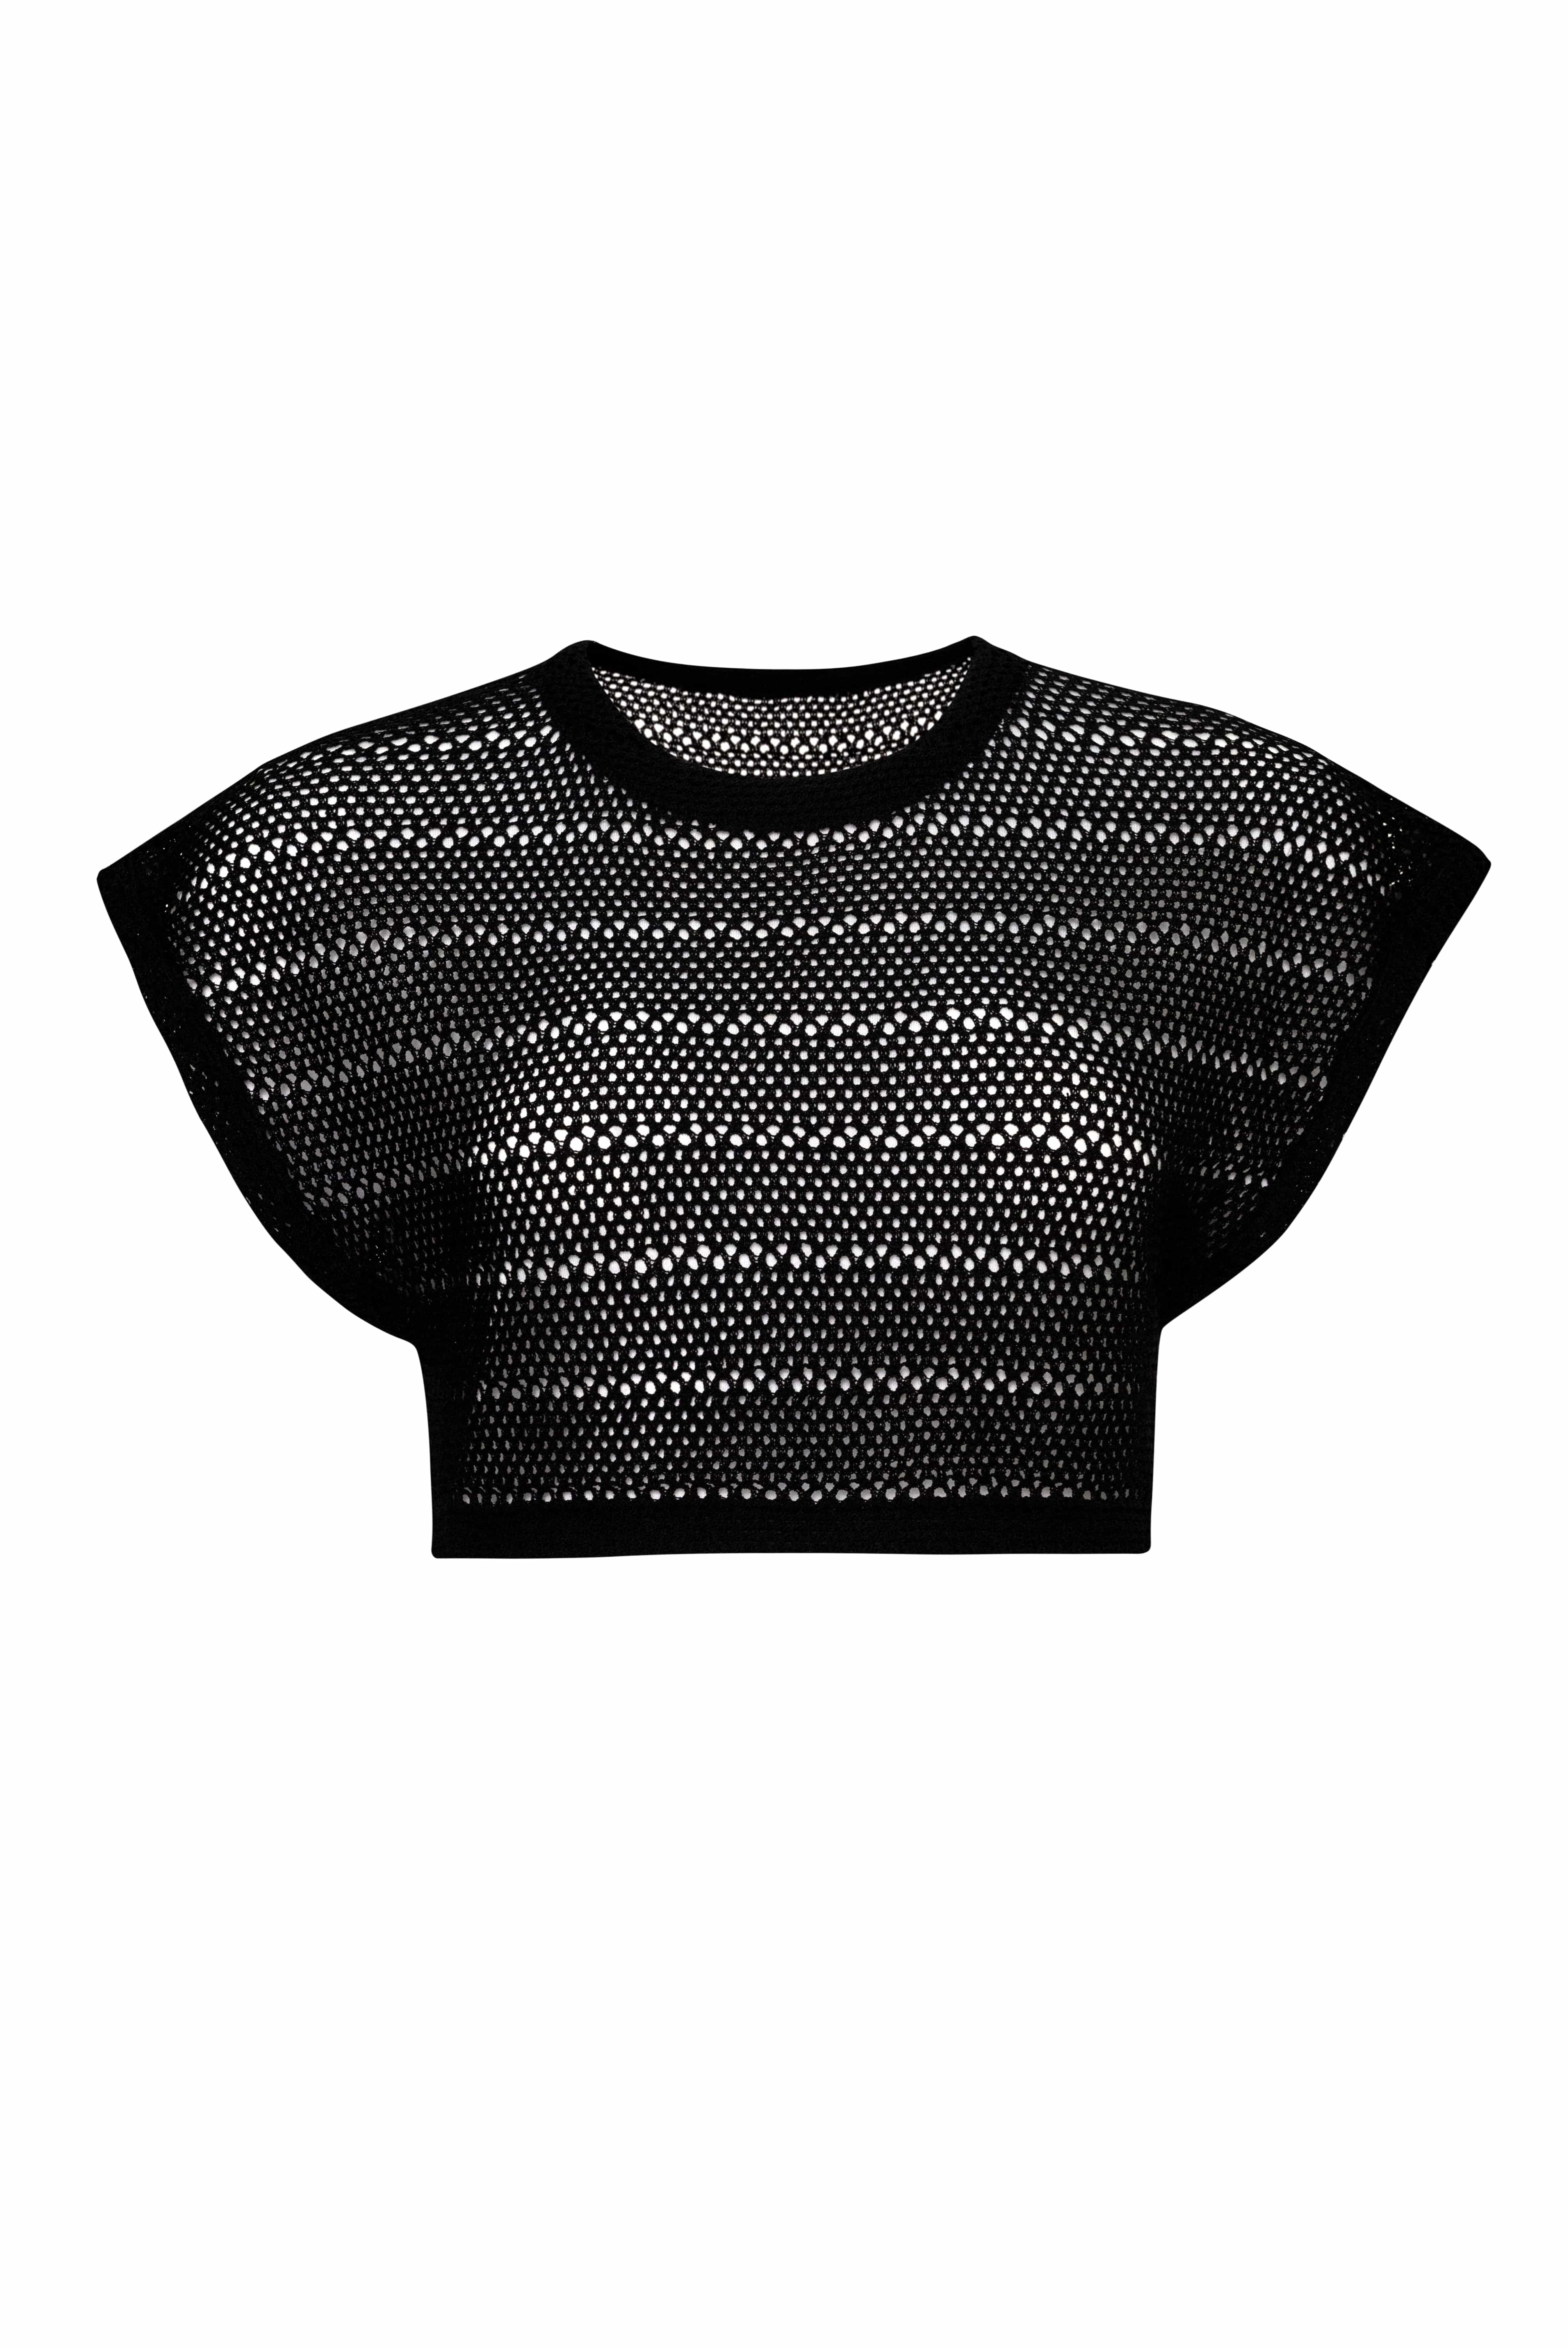 Black knit crop top in front of a white background. 